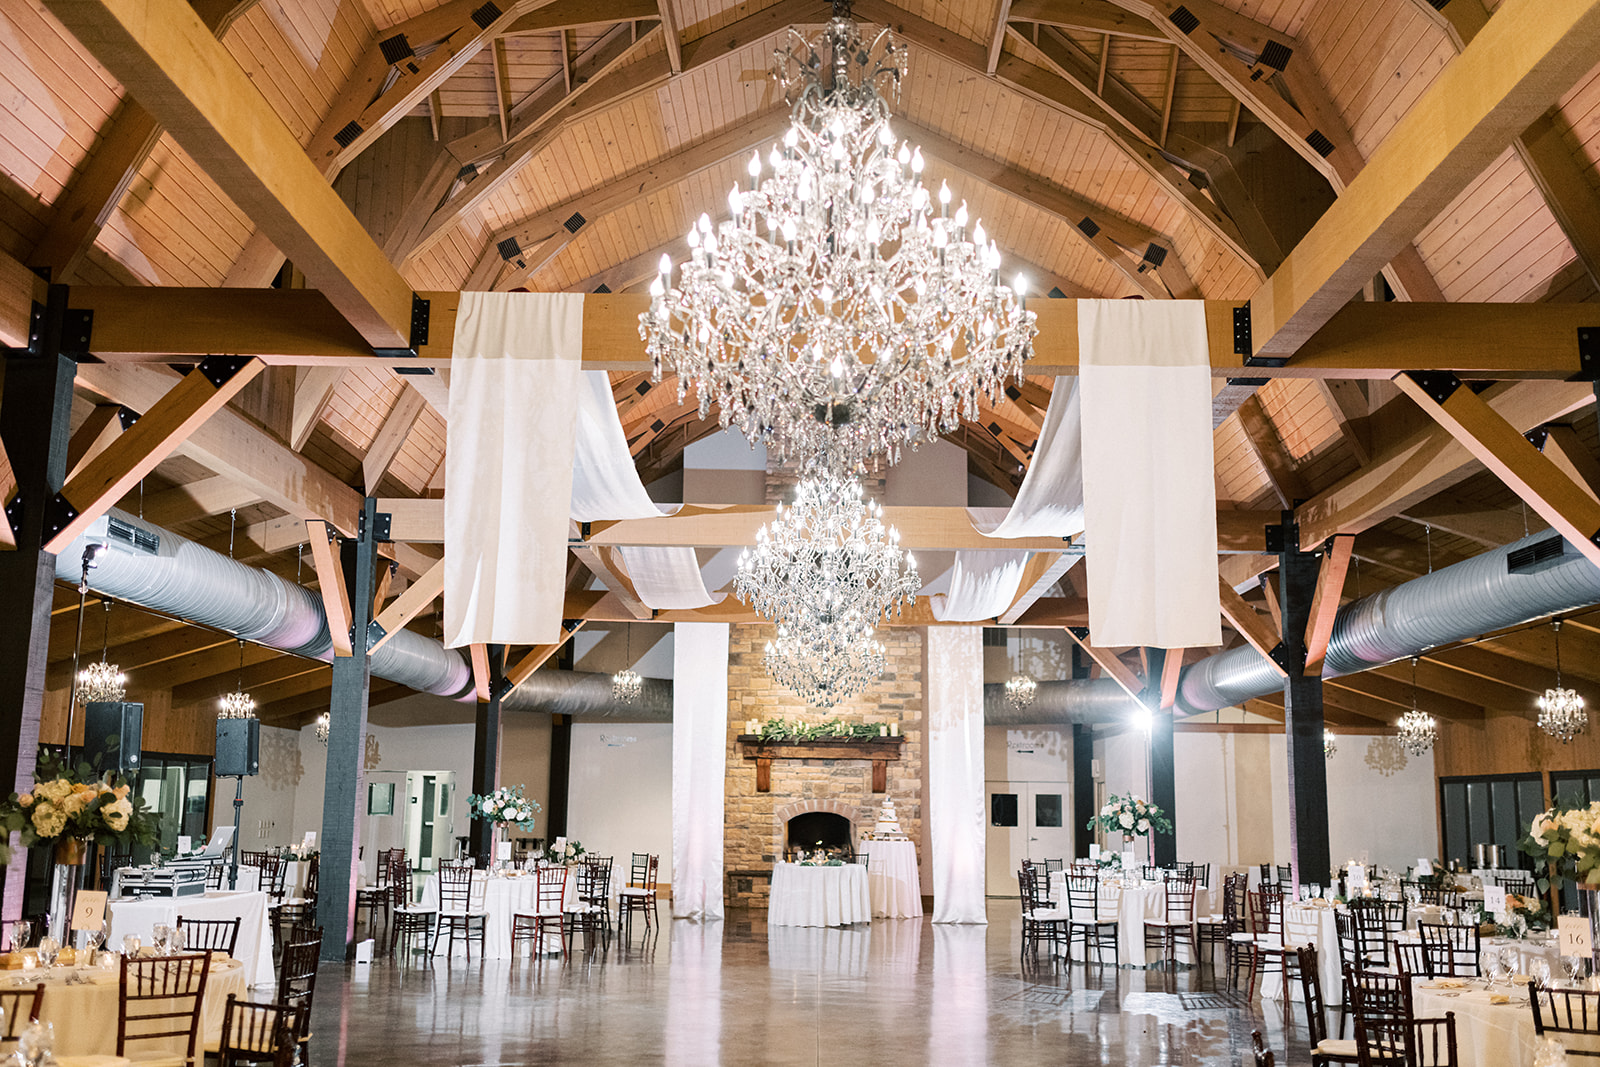 A wedding at the ballroom at Historic Acres of Hershey